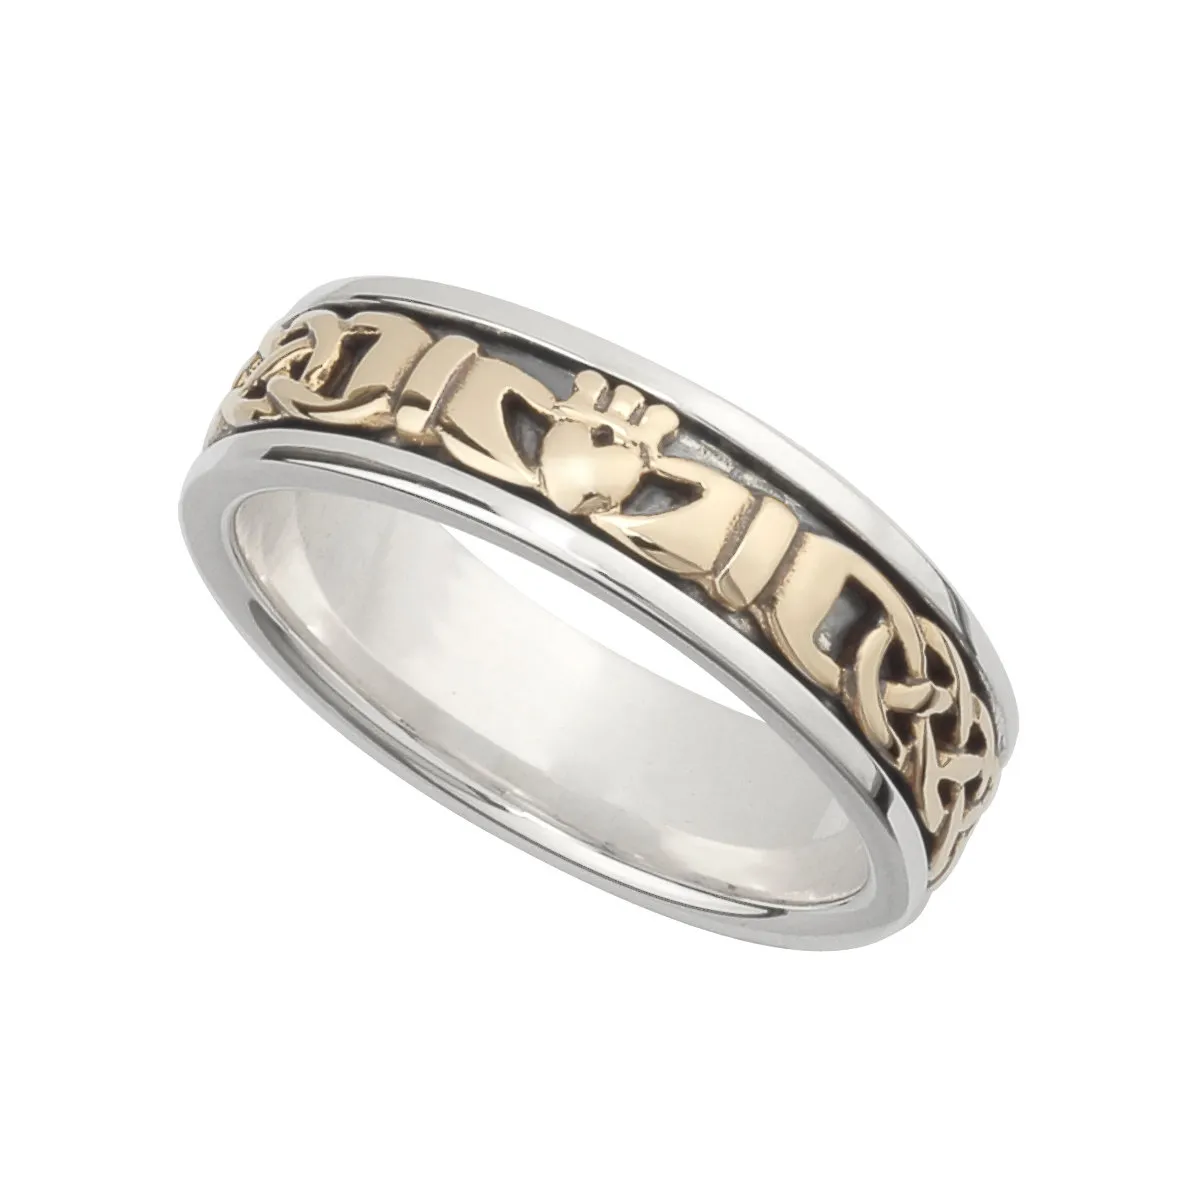 Sterling Silver And Gold Claddagh Band Ring For Her...